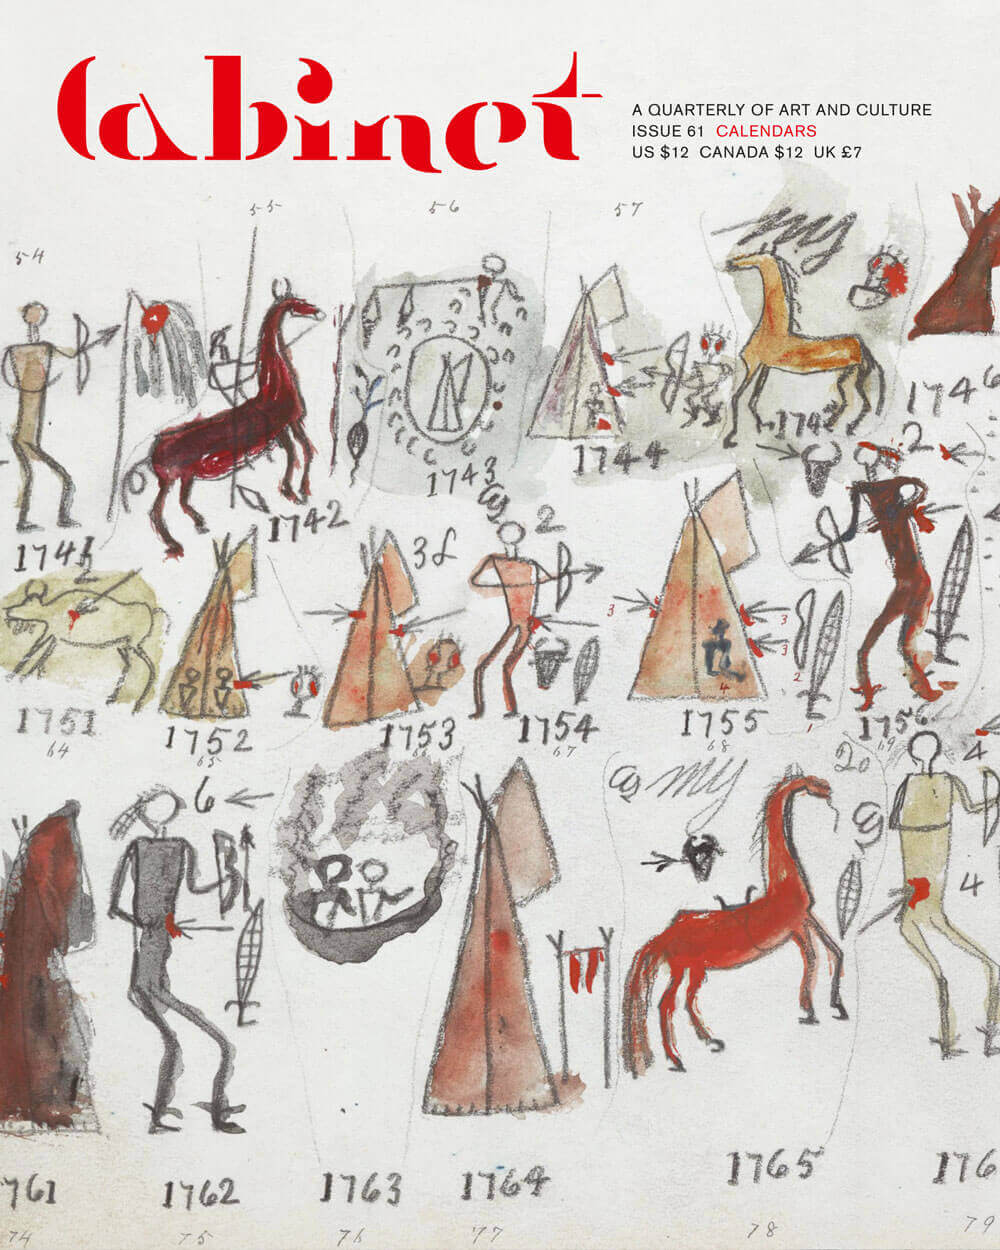 Detail from a Lakota “winter count” calendar consisting of pictographic histories of one memorable and thereby representative event from each year. The Lakota measured years from first snowfall to first snowfall, hence the name “winter count.” The detail reproduced here depicts the years between 1742 and 1765.